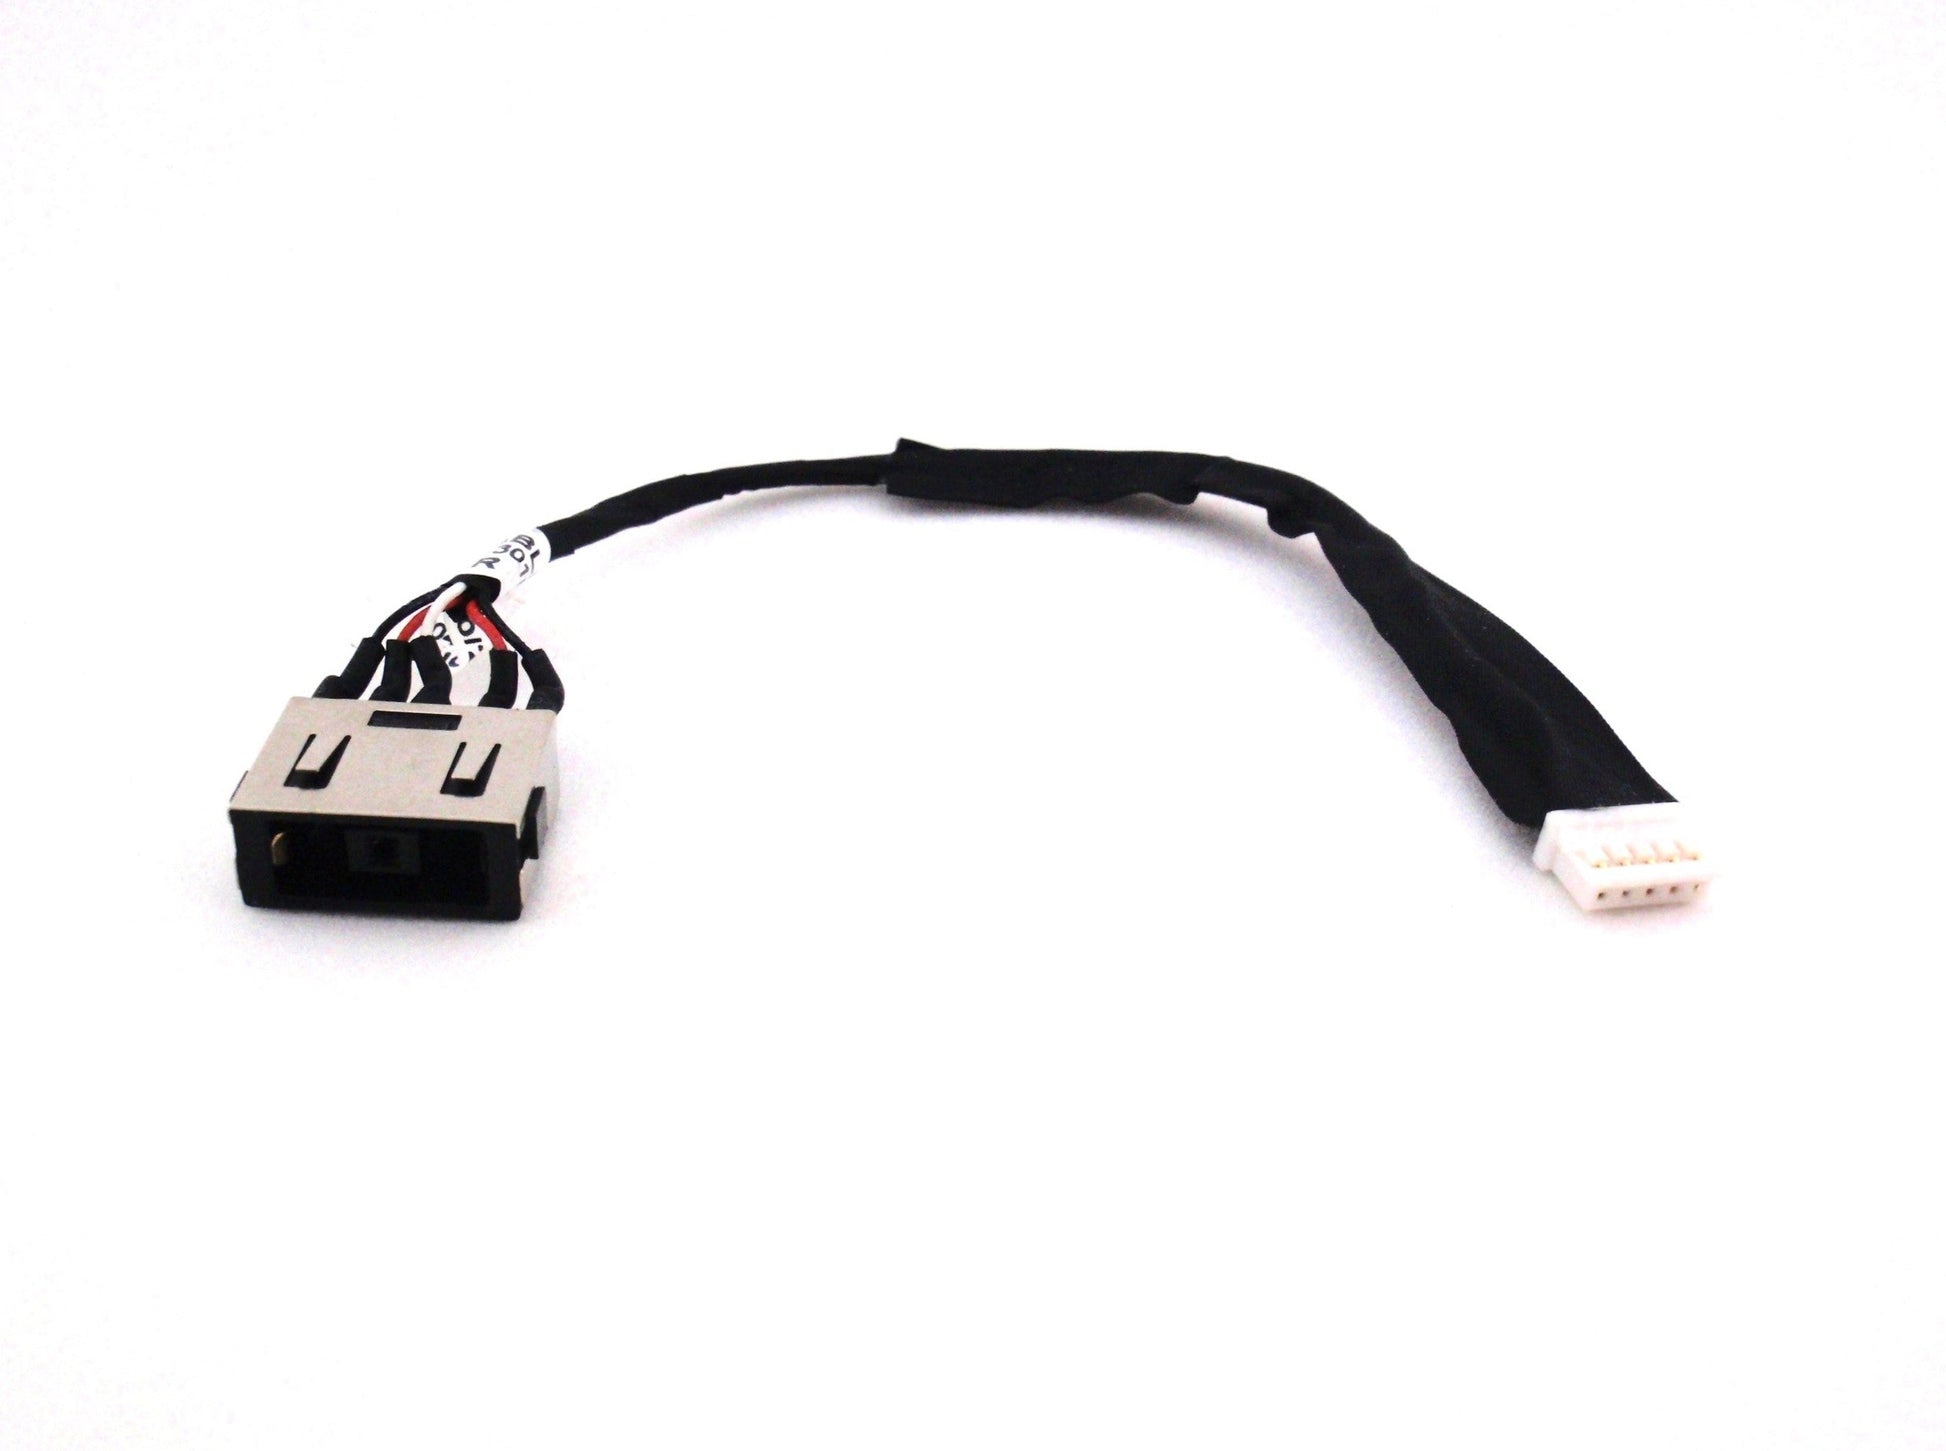 Lenovo New DC In Power Jack Charging Port Cable VILT2 SC10A23364 ThinkPad T440p DC30100L000 04X5405